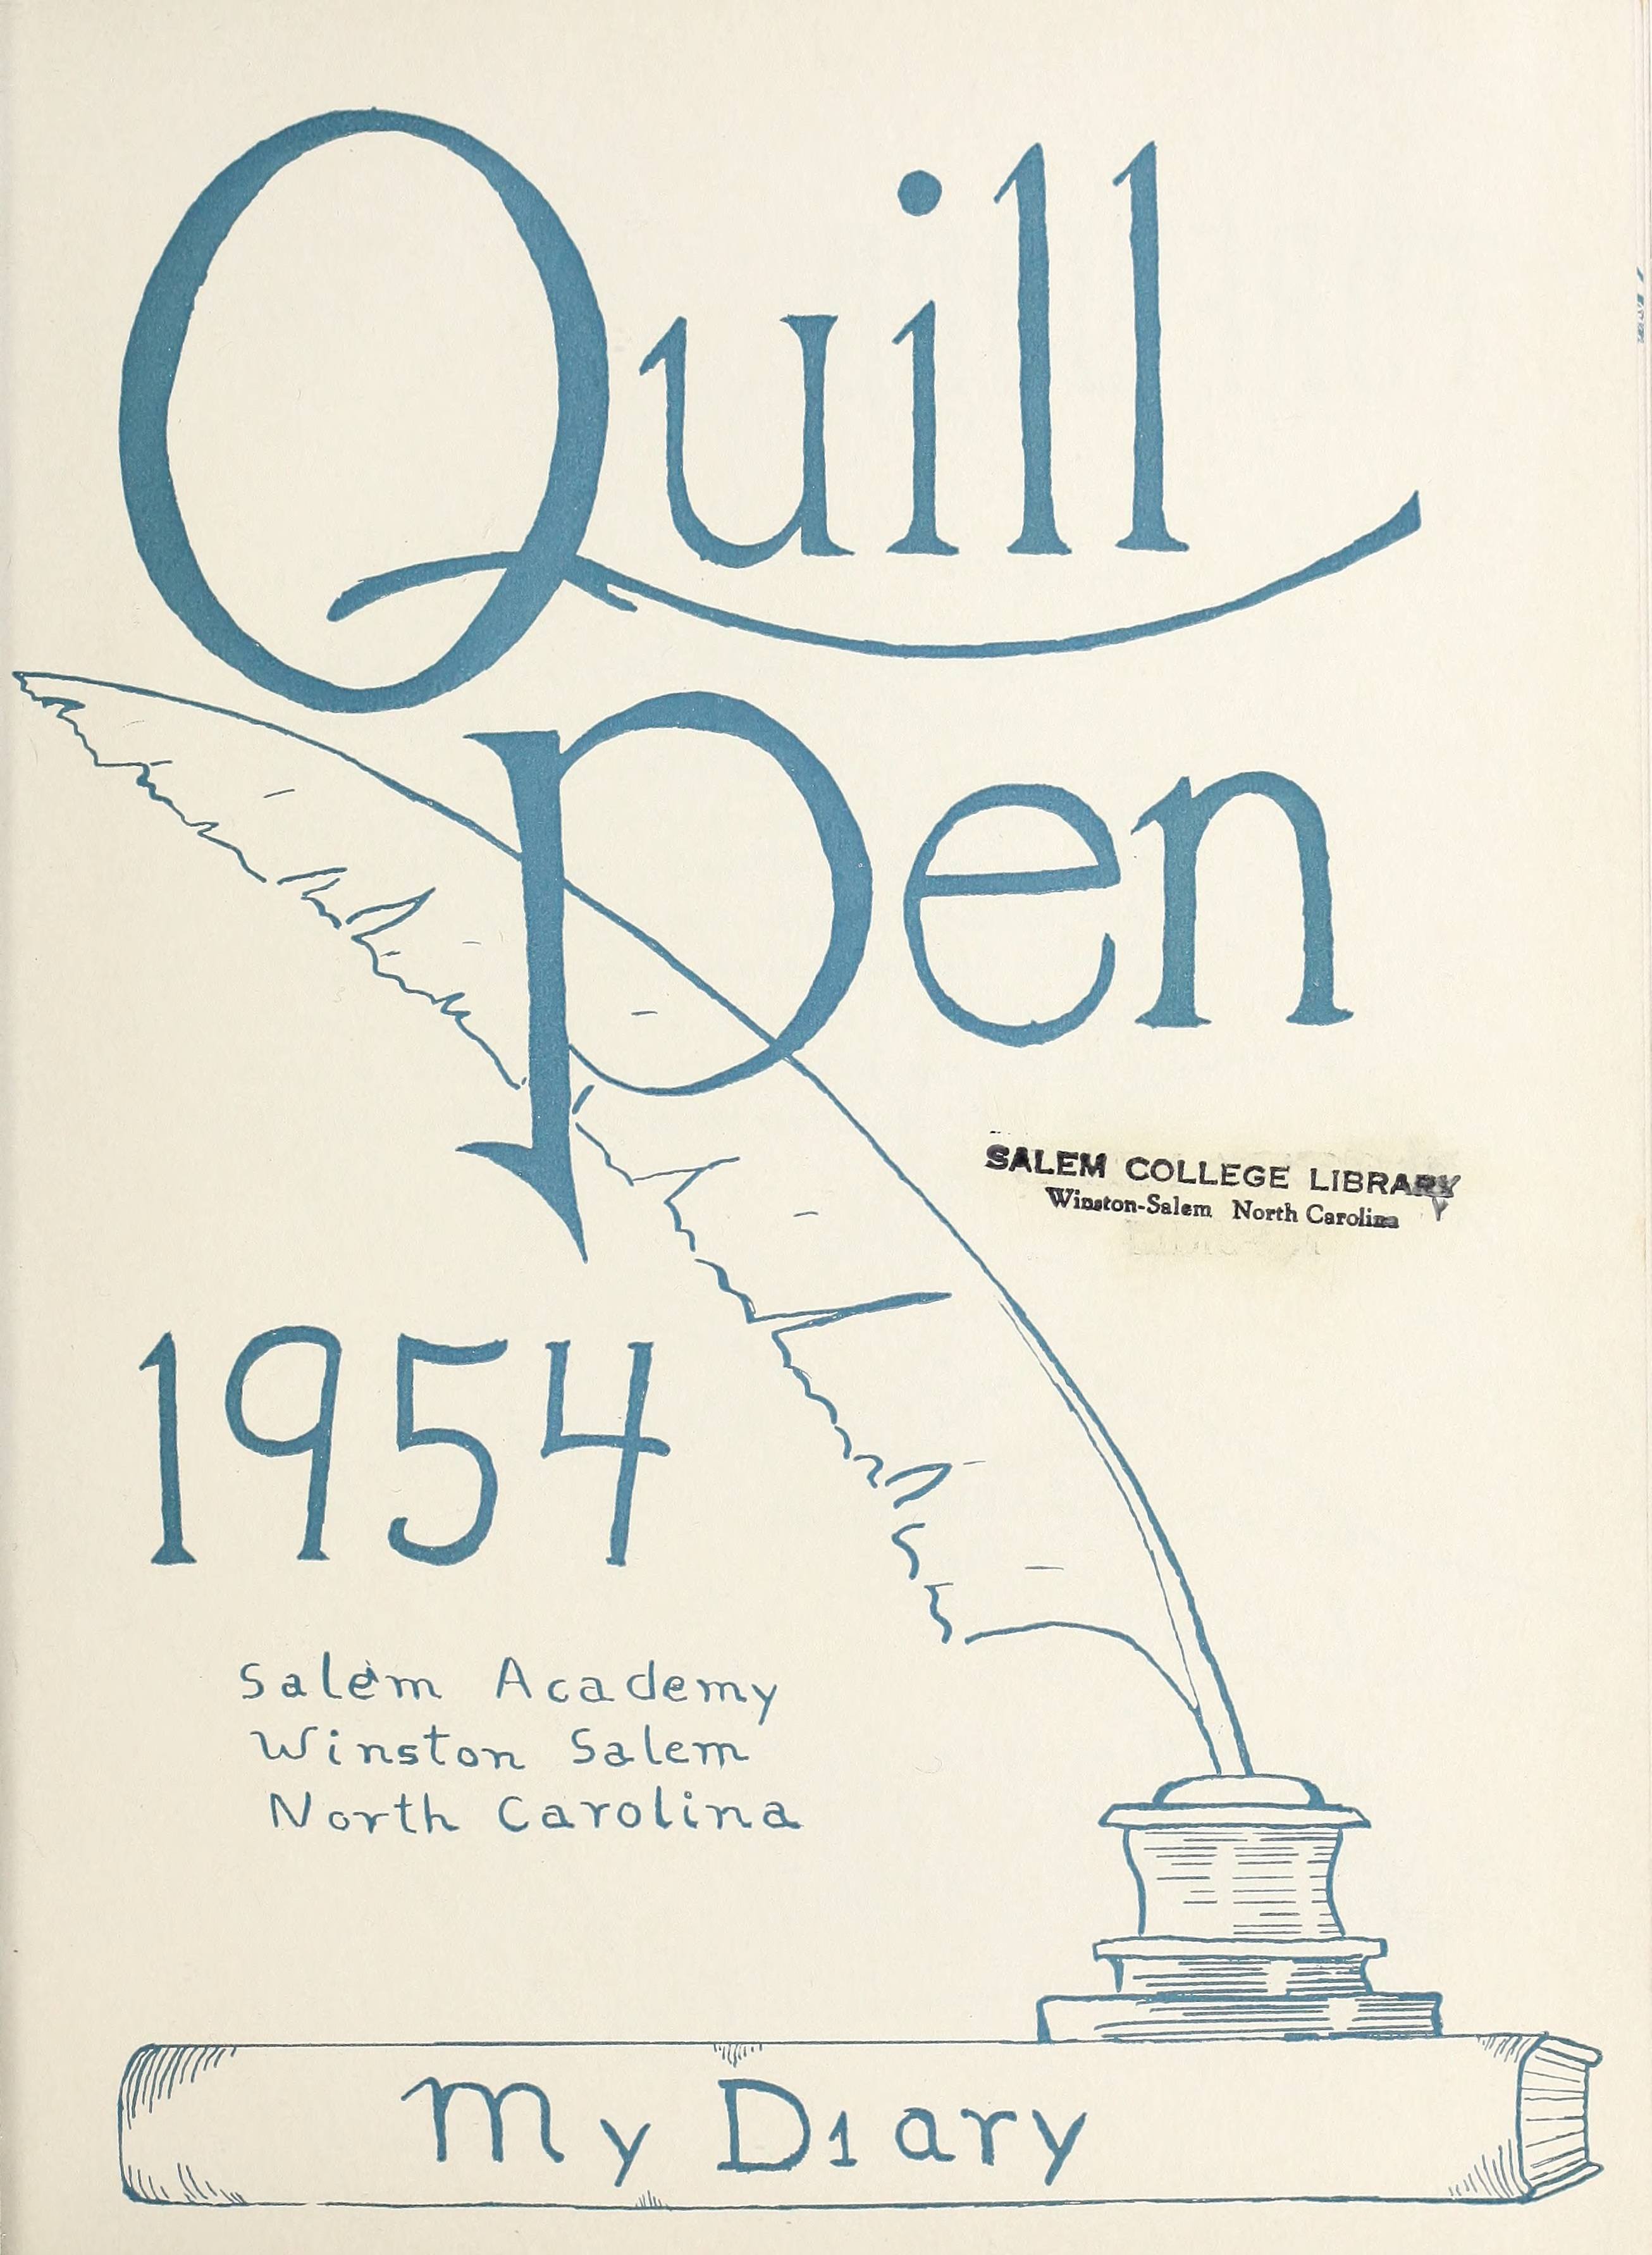 The Quill Pen 1954